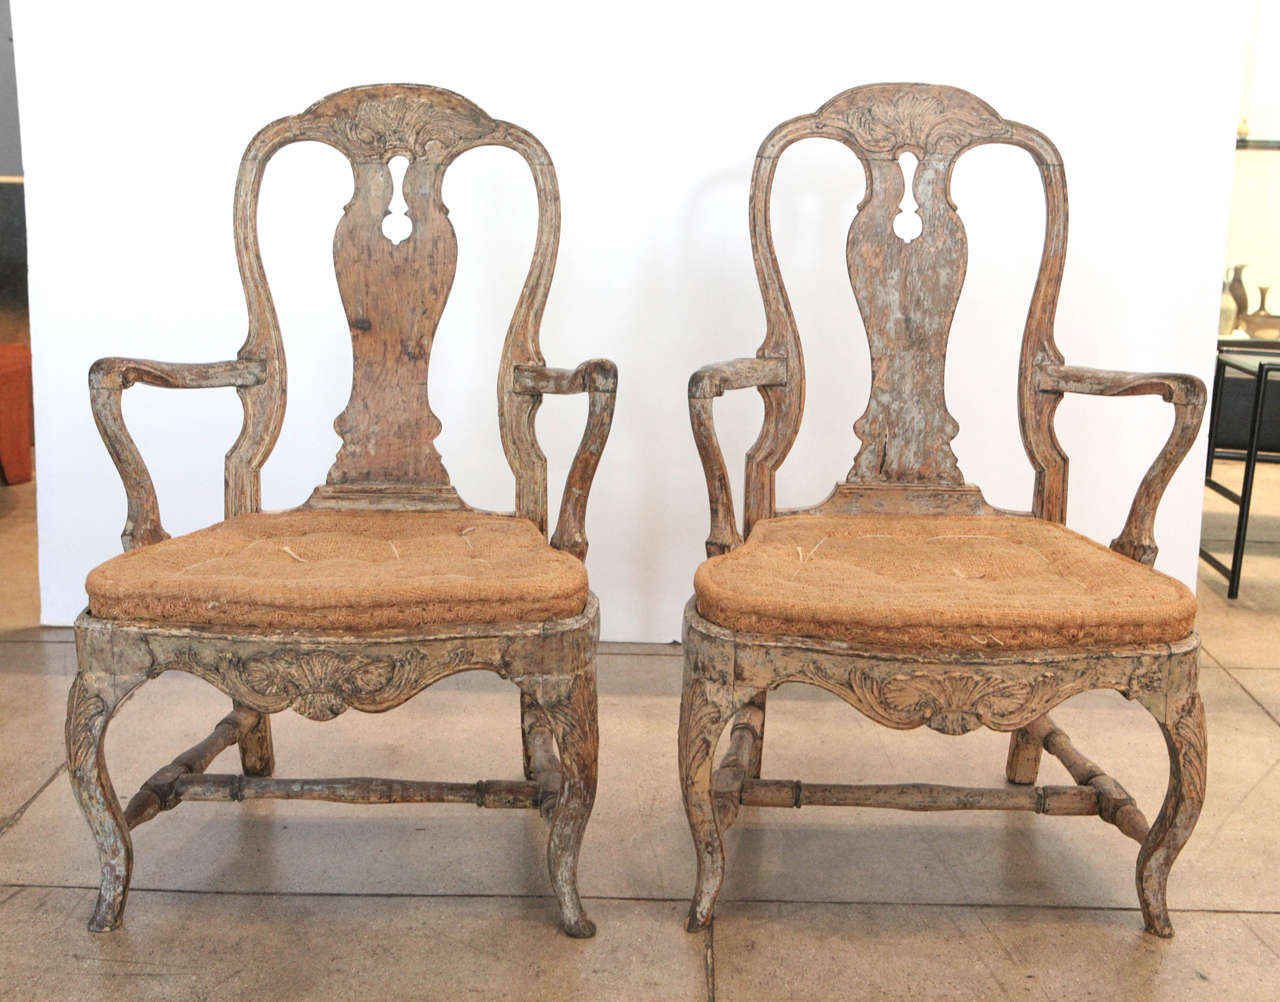 A pair of Gustavian era armchairs.
Completely sturdy and useable. Sold only as a pair.